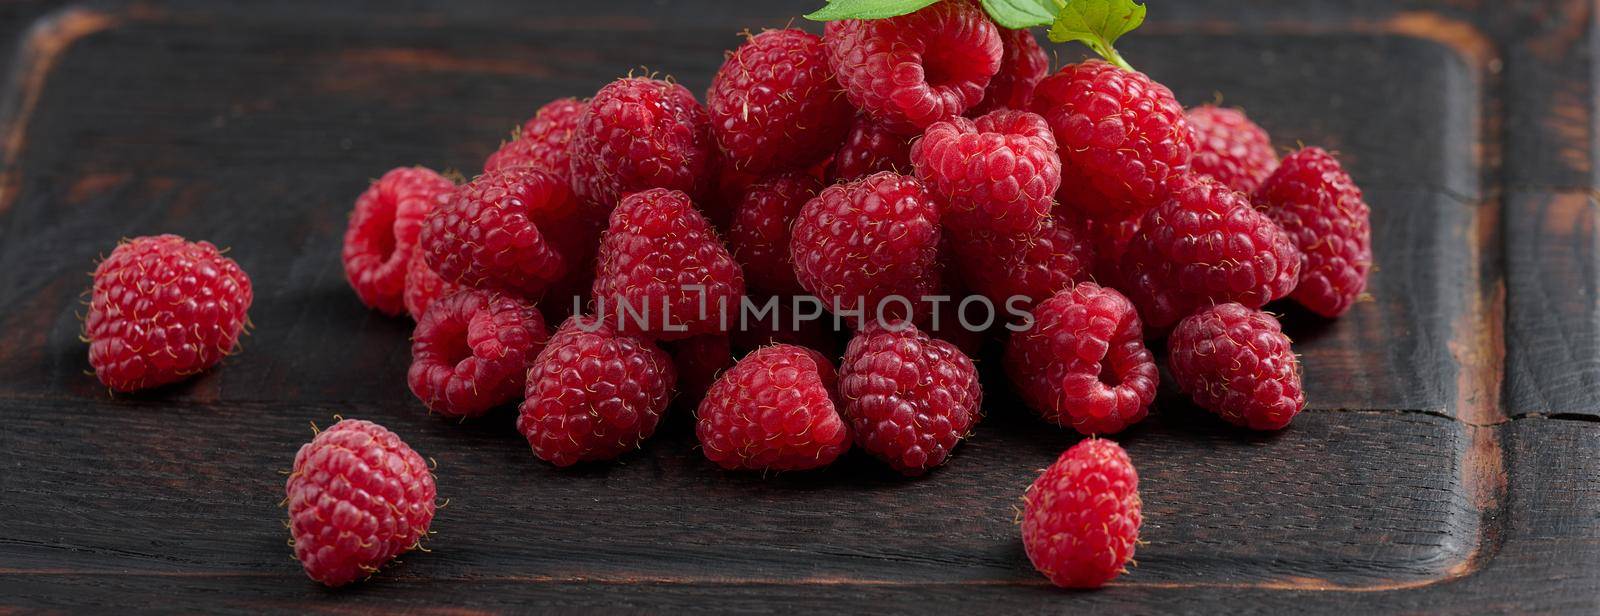 Ripe red raspberries on a brown wooden board